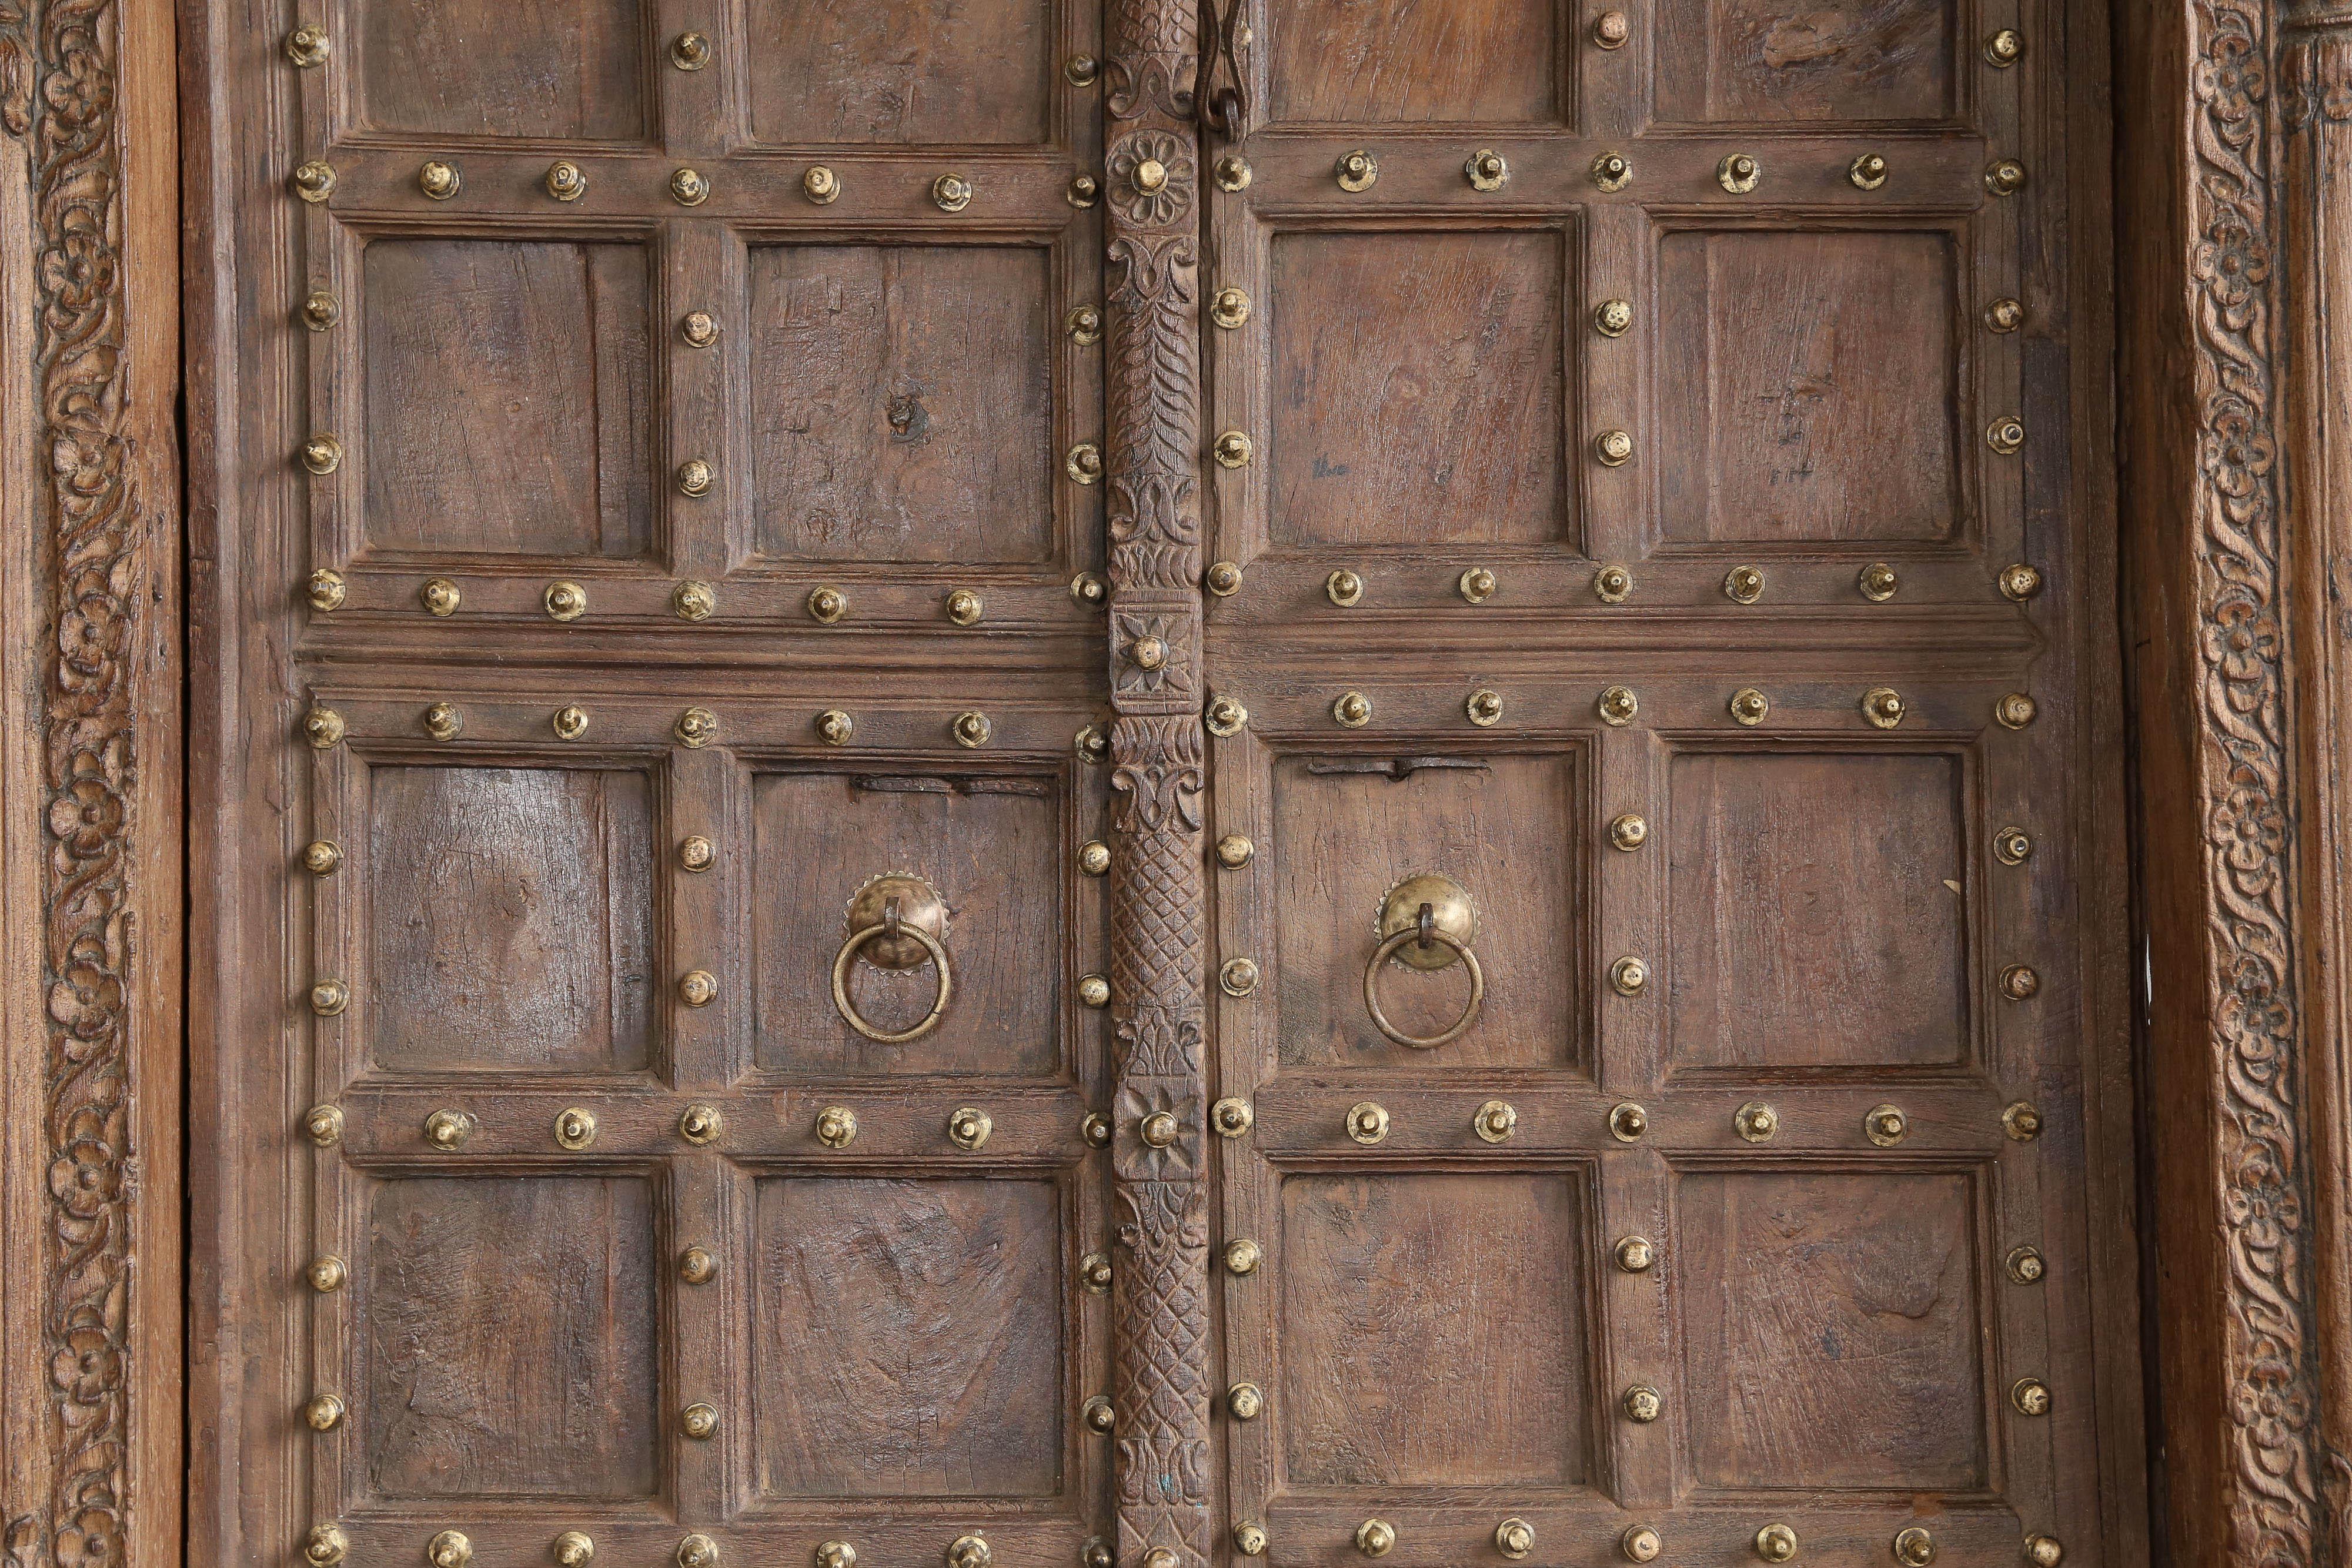 This is an architectural wonder. One should take a close look at the intricate carving, metal studded art work and the hand forged iron works. The builders of the door meant that this door would last for ever. No intruder can get past this door. The